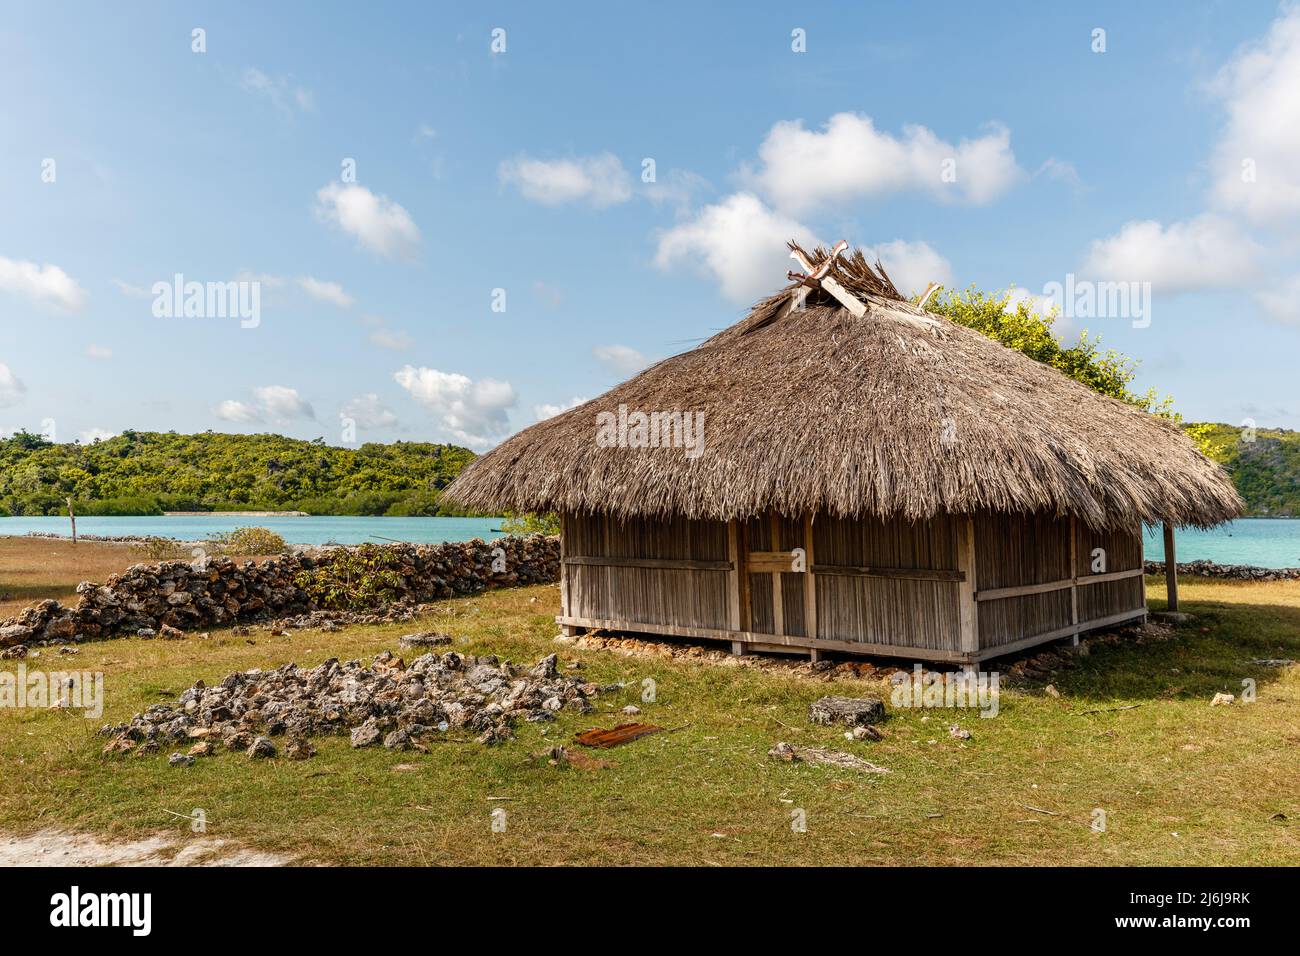 Traditional house in a coastal village Oeseli at Rote Island, East Nusa Tenggara province, Indonesia Stock Photo